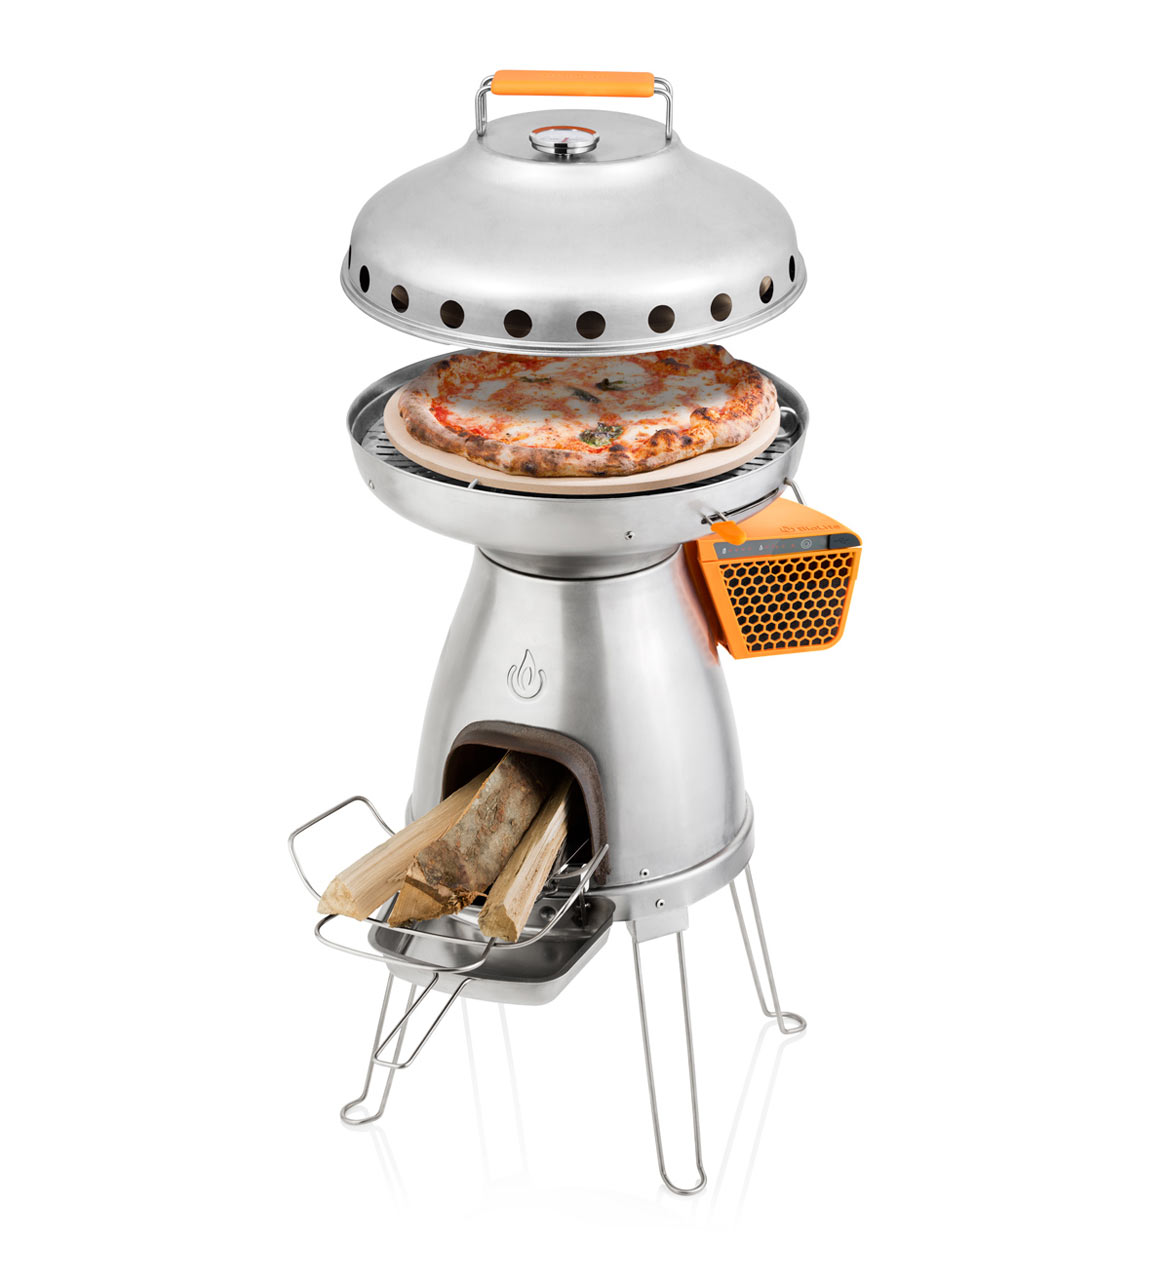 01 BaseCamp is a wood burning stove and grill that converts heat into usable electricity